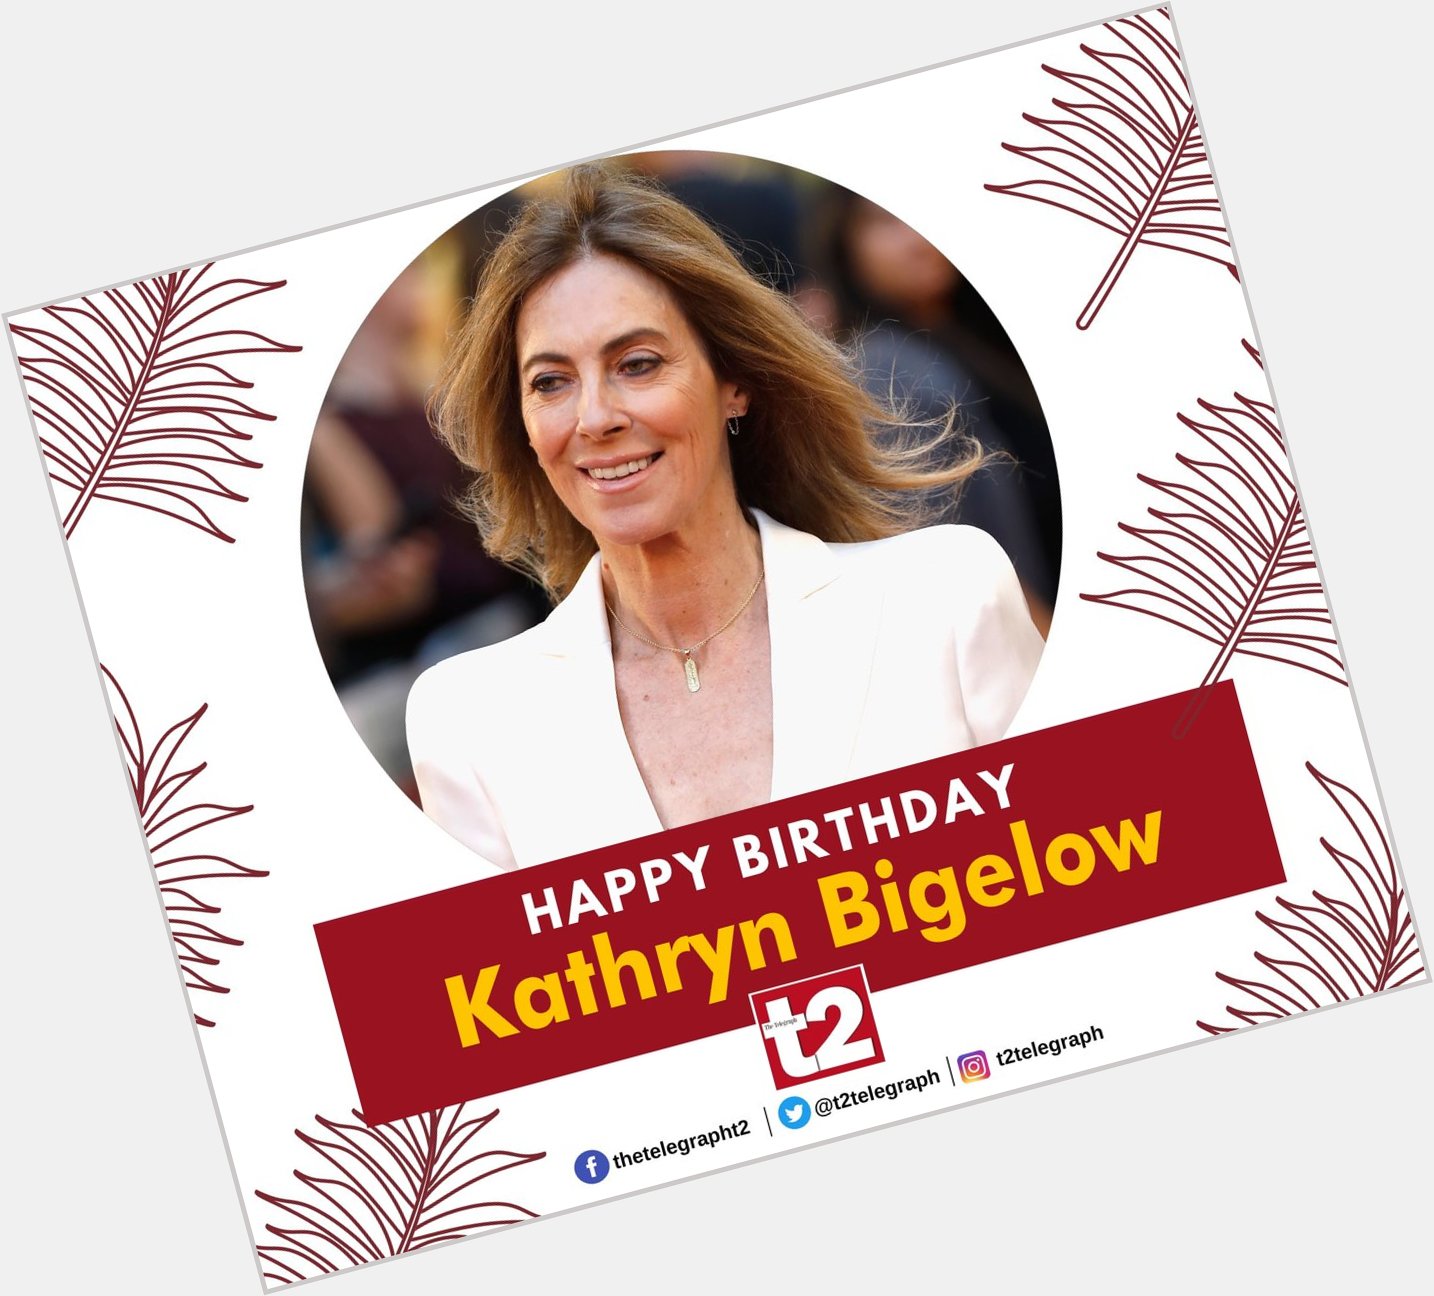 Happy birthday Kathryn Bigelow and thanks for making movies that pack a punch 